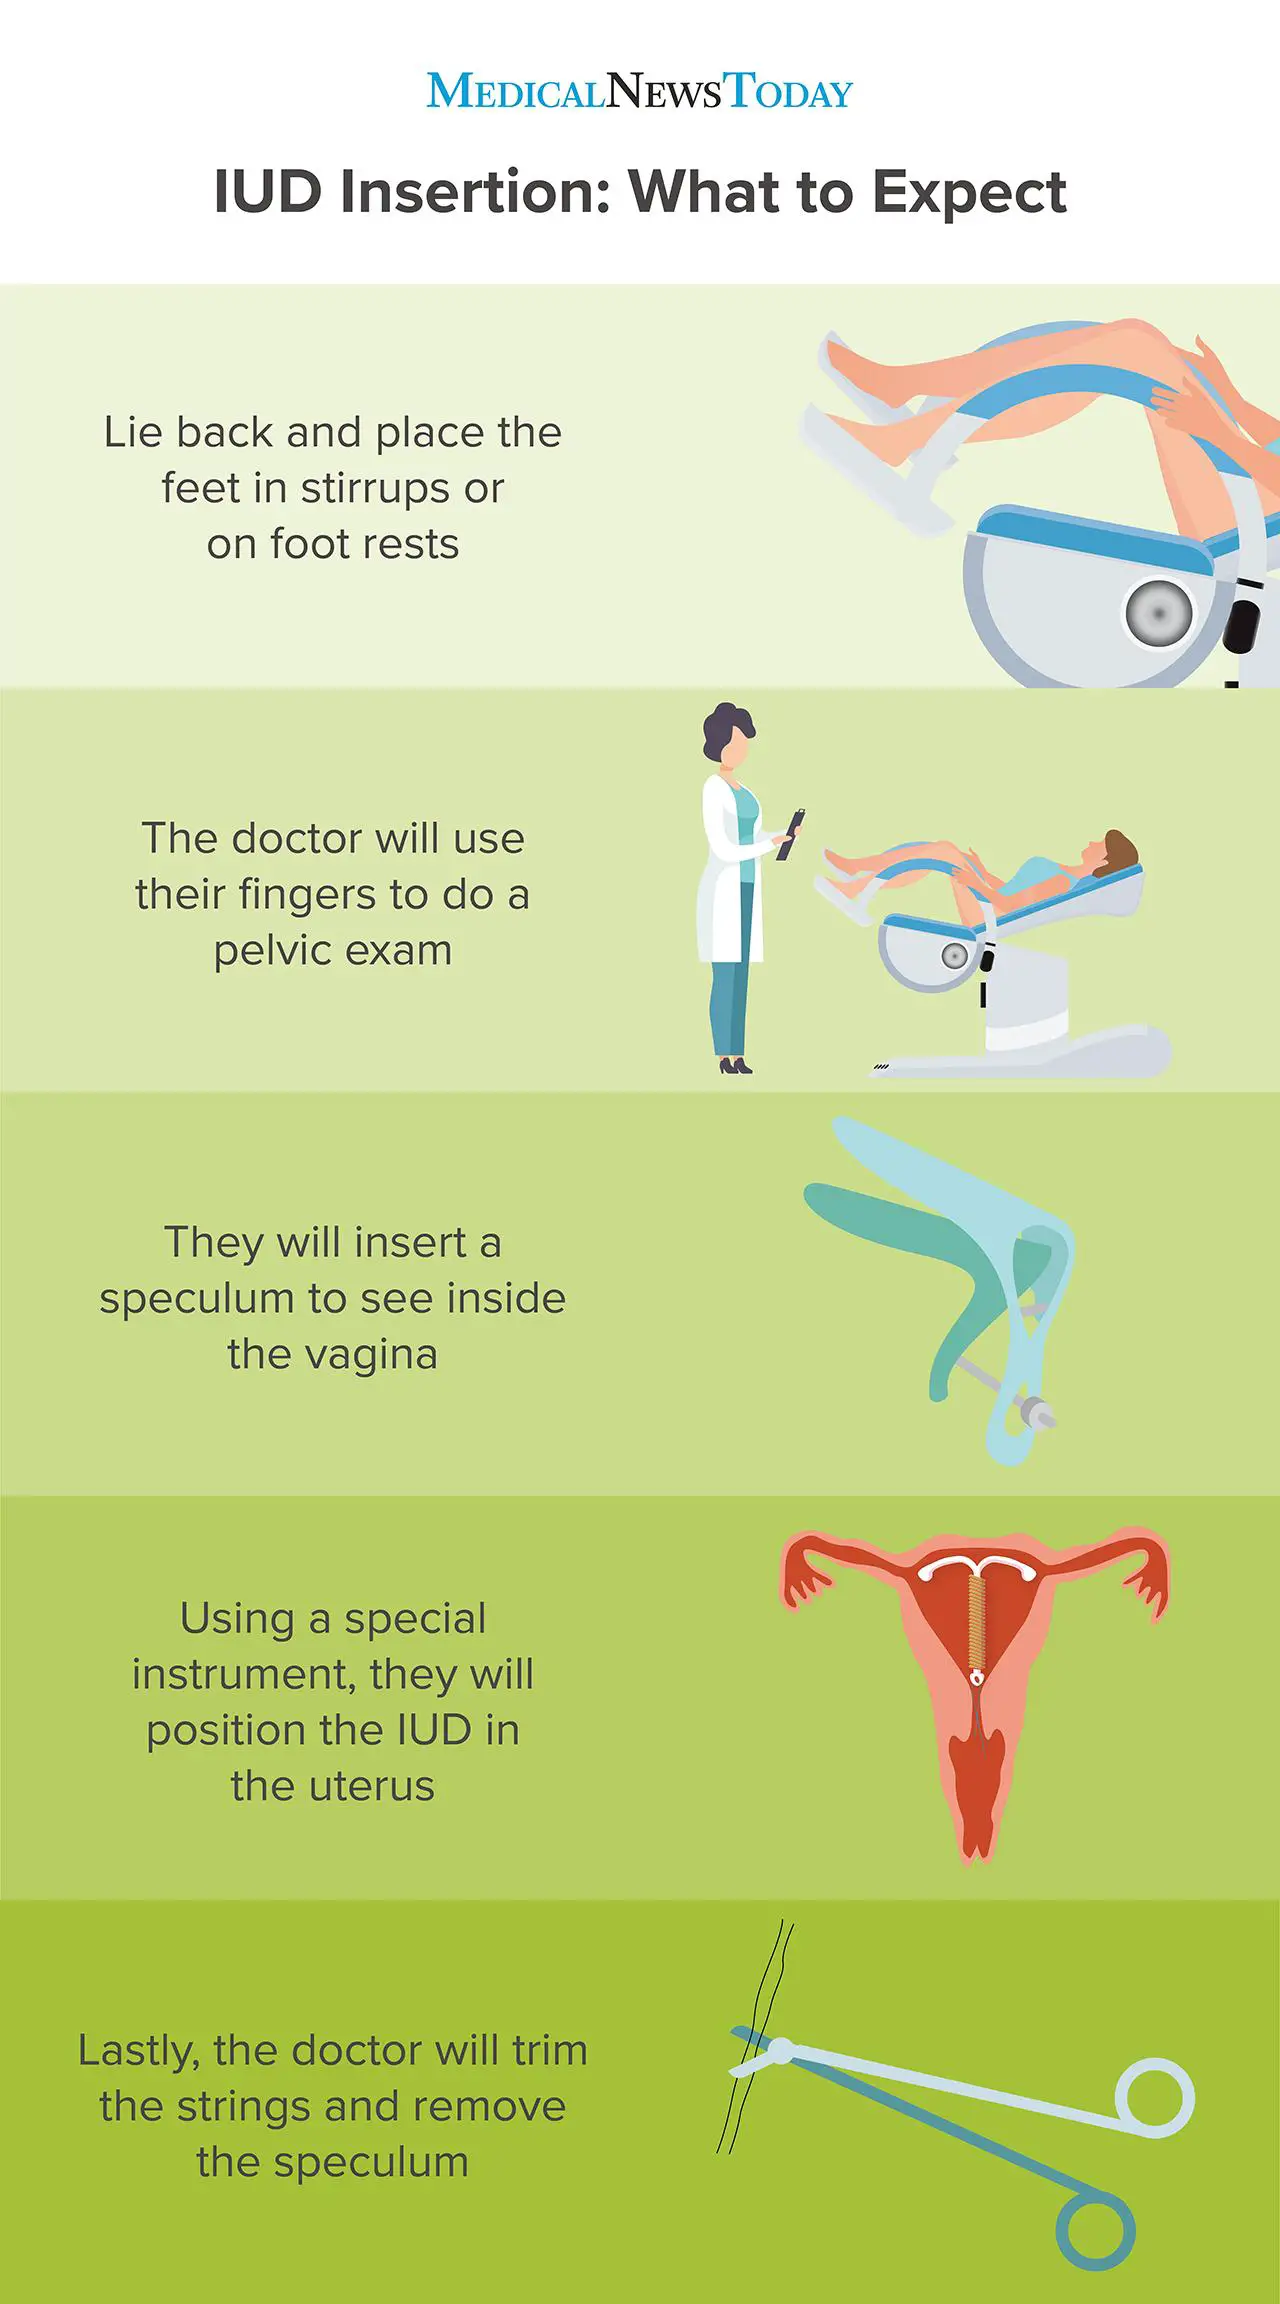 IUD insertion: A guide and what to expect